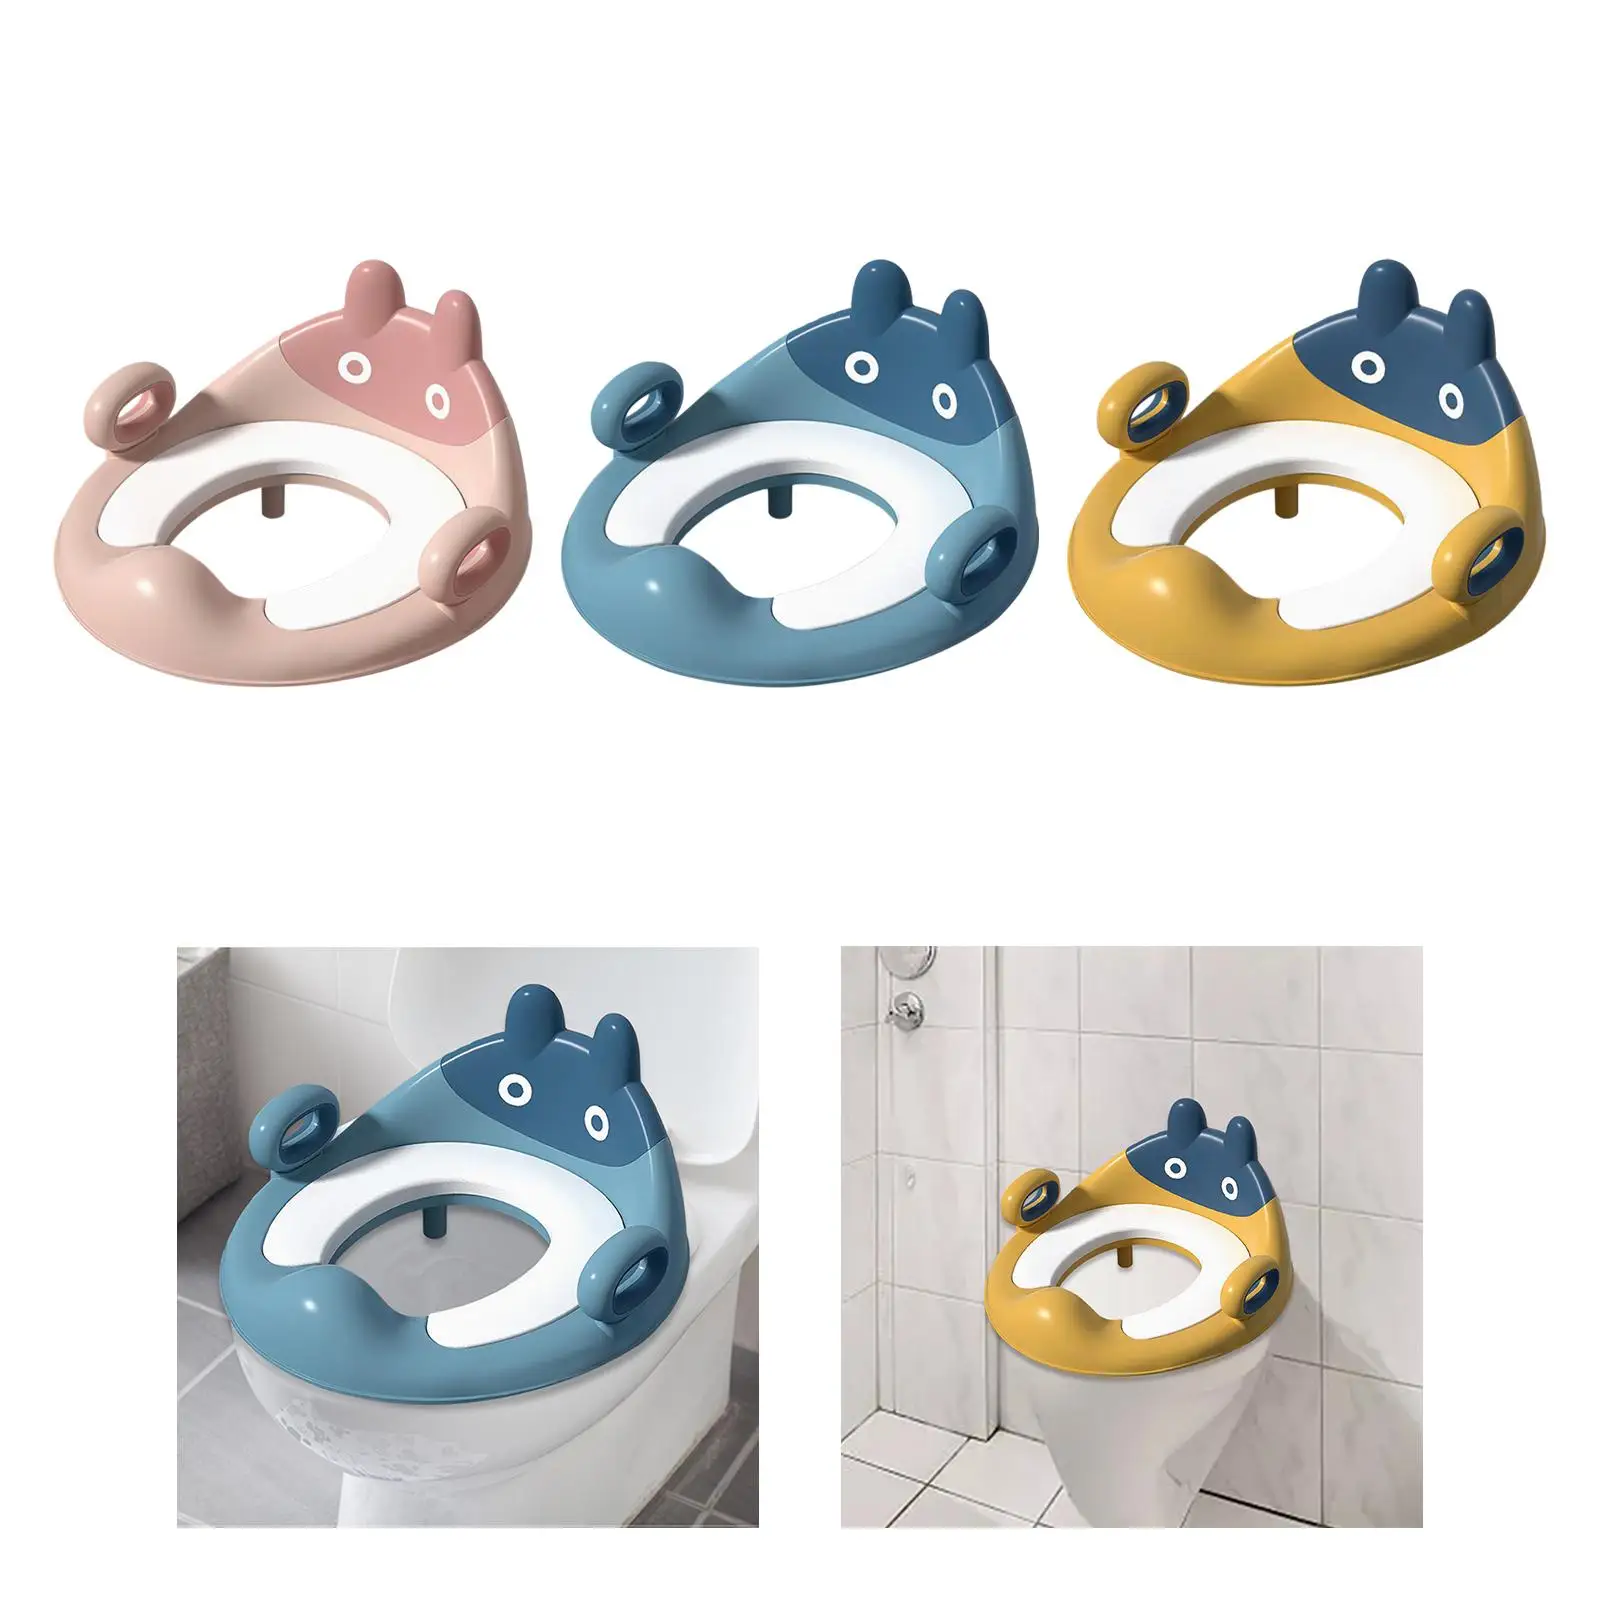 Potty Train Seat Space Saving with Guard Fits Most Toilets Comfortable with Handles Training Toilet for for Kids Girl Child